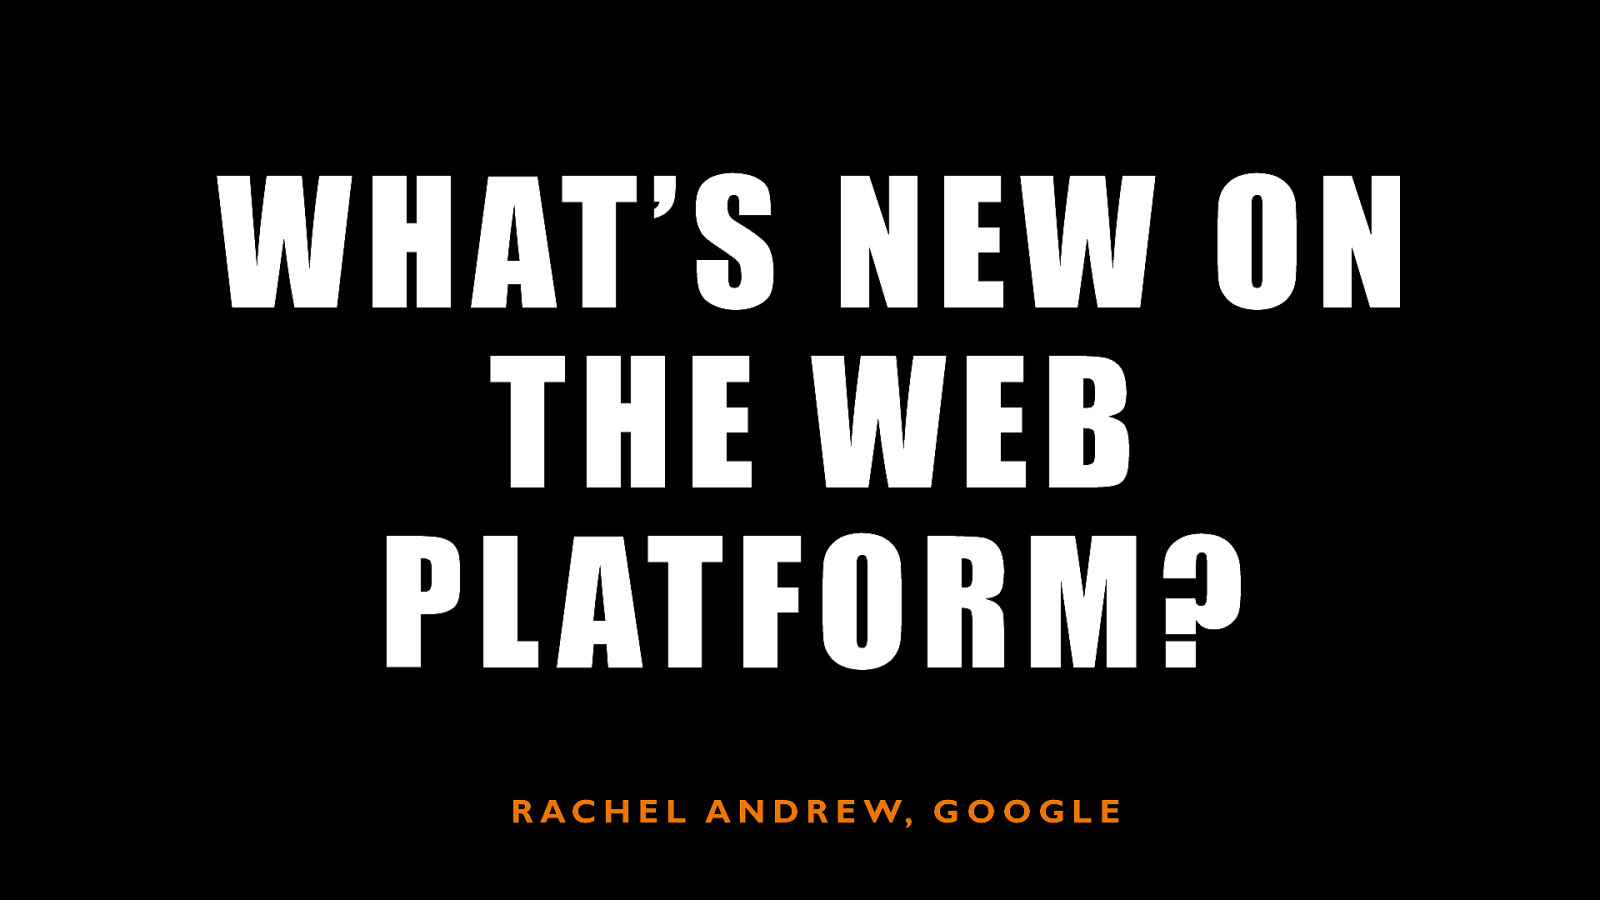 What’s new on the web platform?